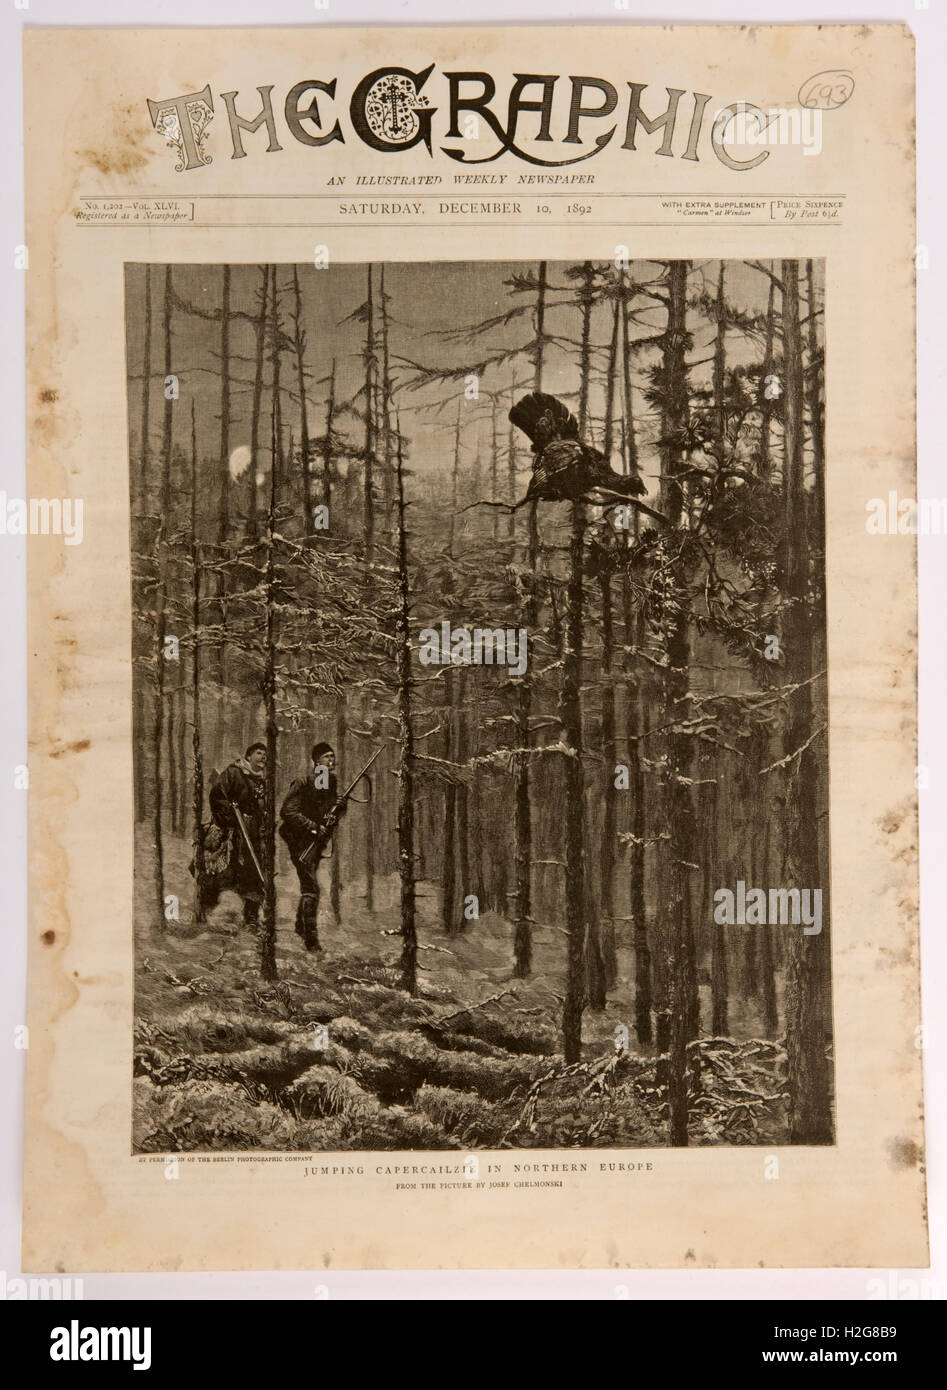 Front page of the Graphic an illustrated weekly newspaper from December 10 1892 showing a Capercailie being hunted in a forest i Stock Photo